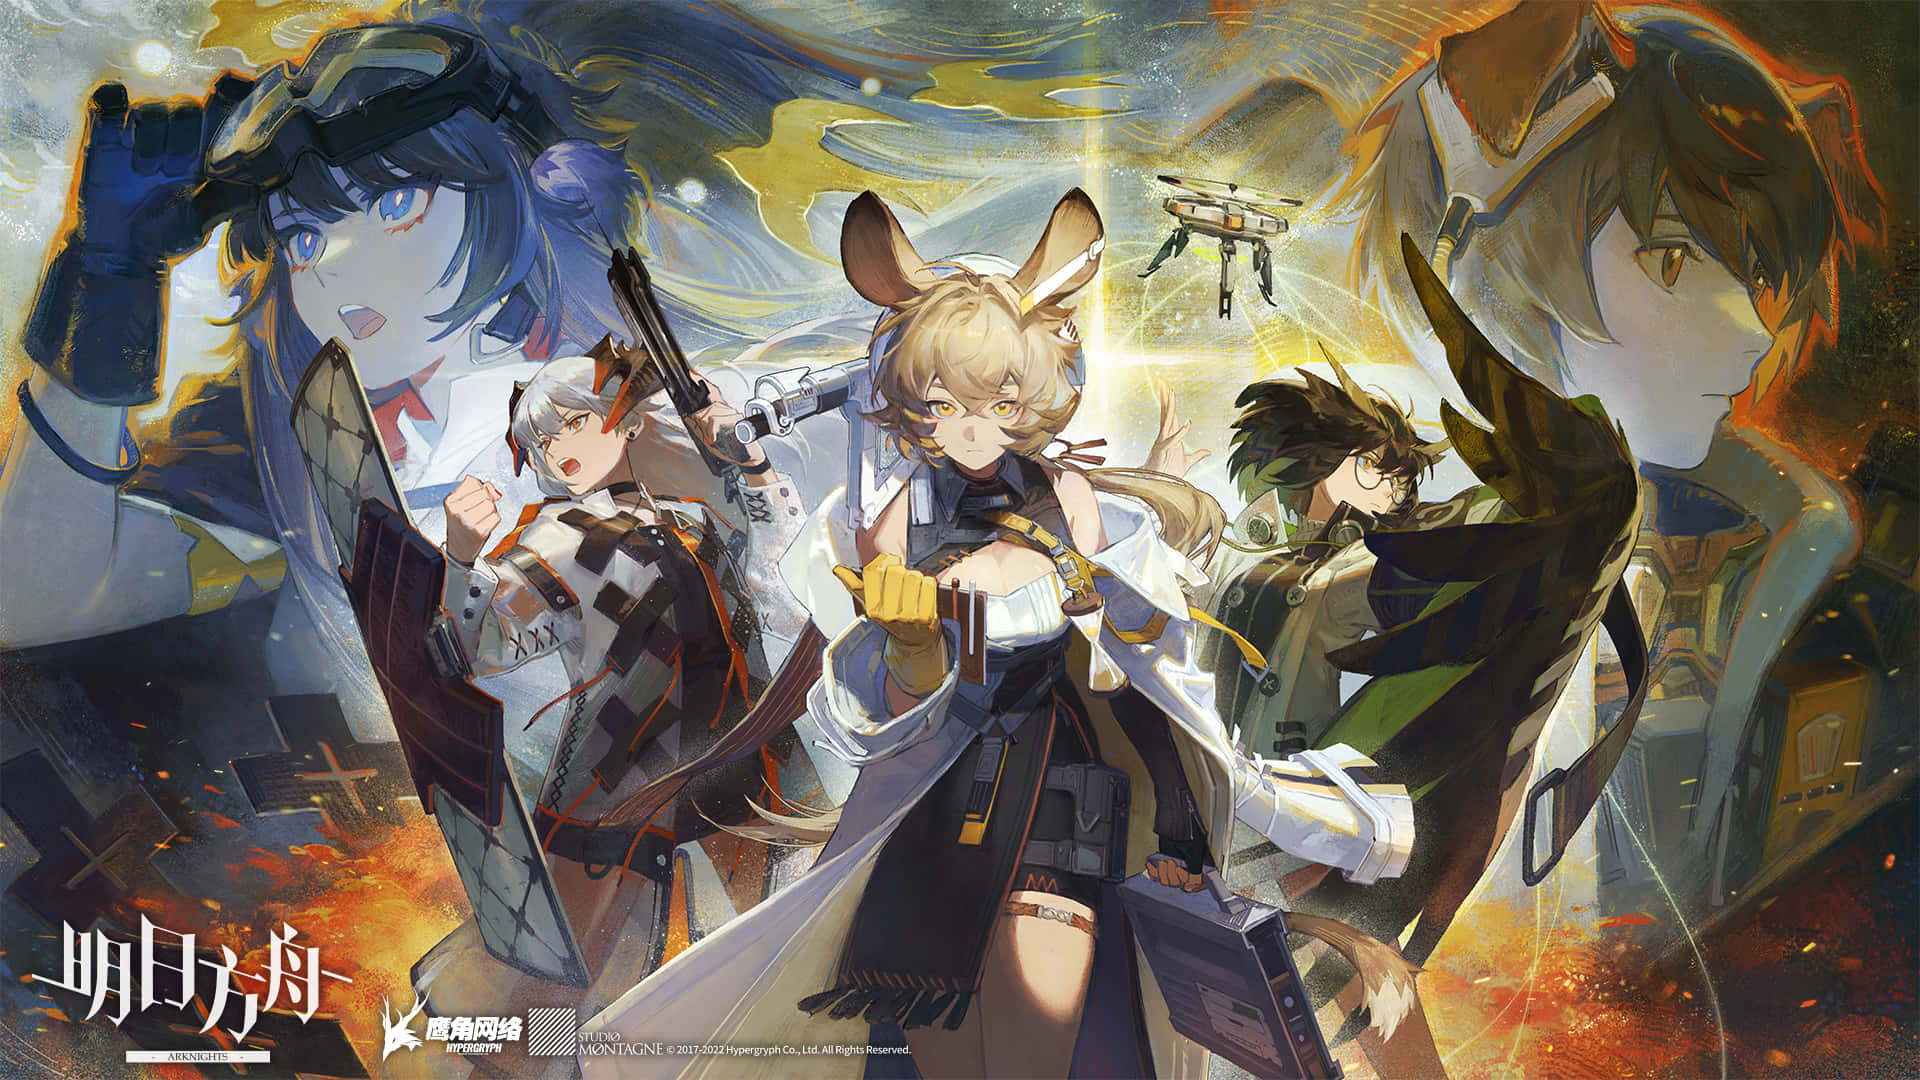 Experience a world of danger and adventure with Arknights Wallpaper